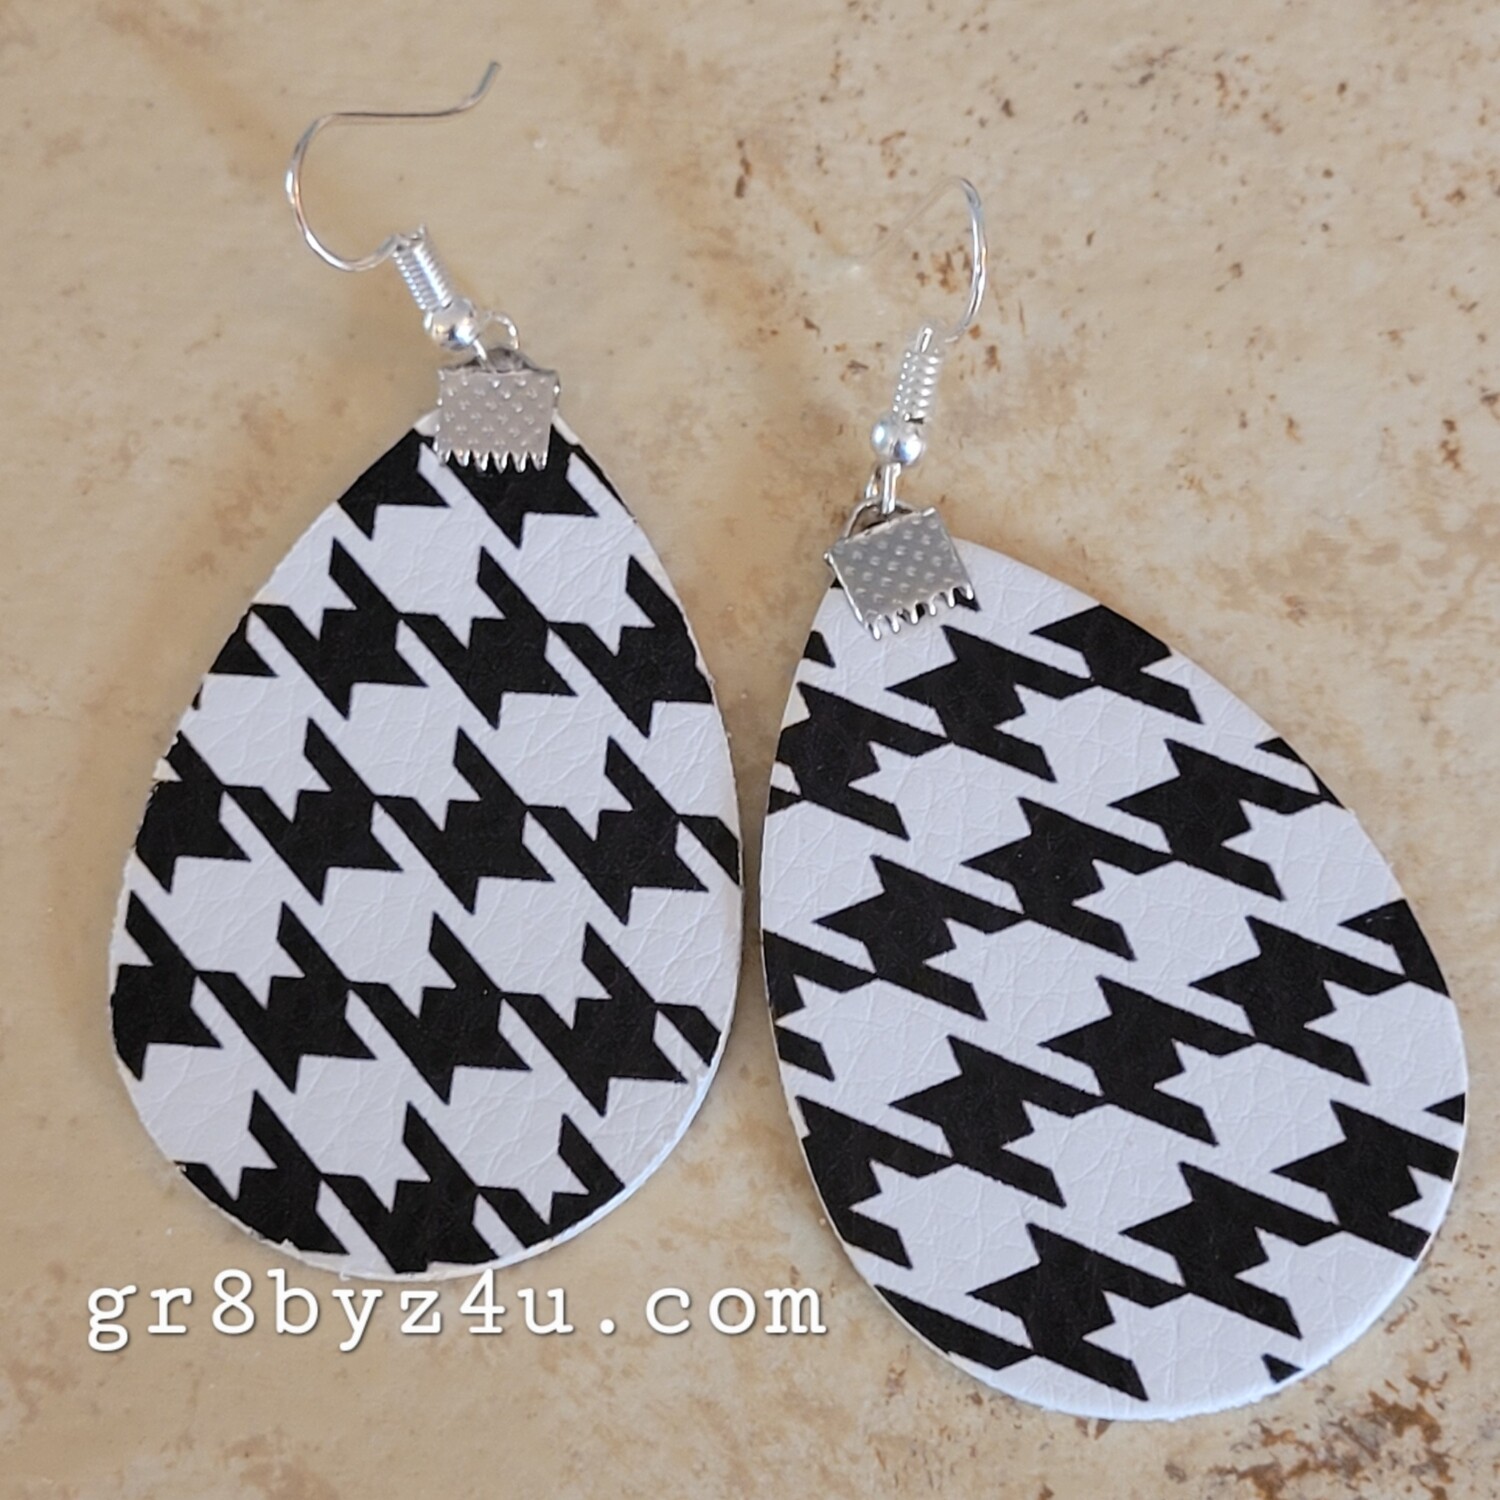 Black and white houndstooth faux leather earrings